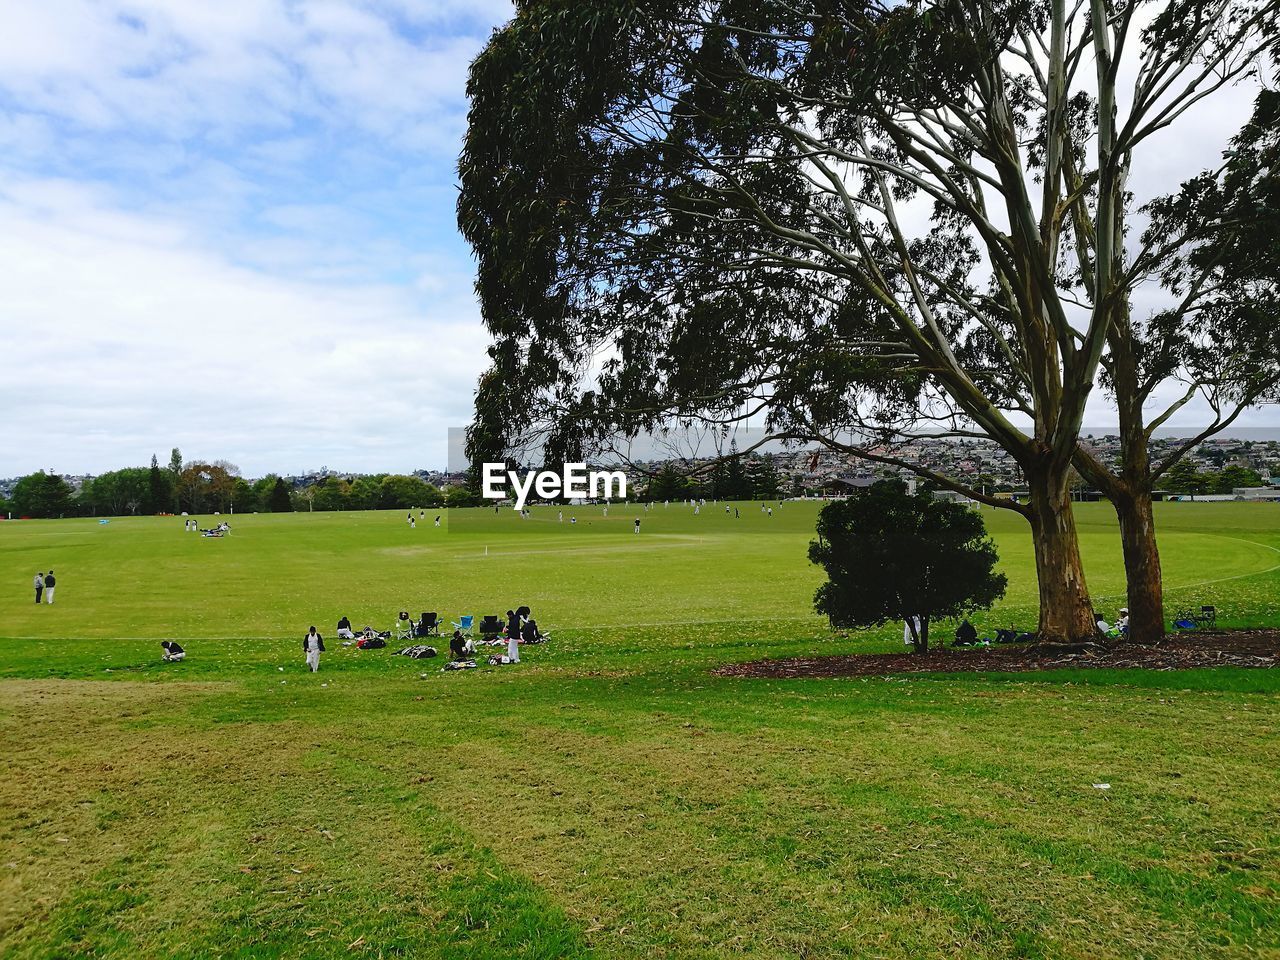 PEOPLE SITTING ON GRASSY FIELD AGAINST SKY